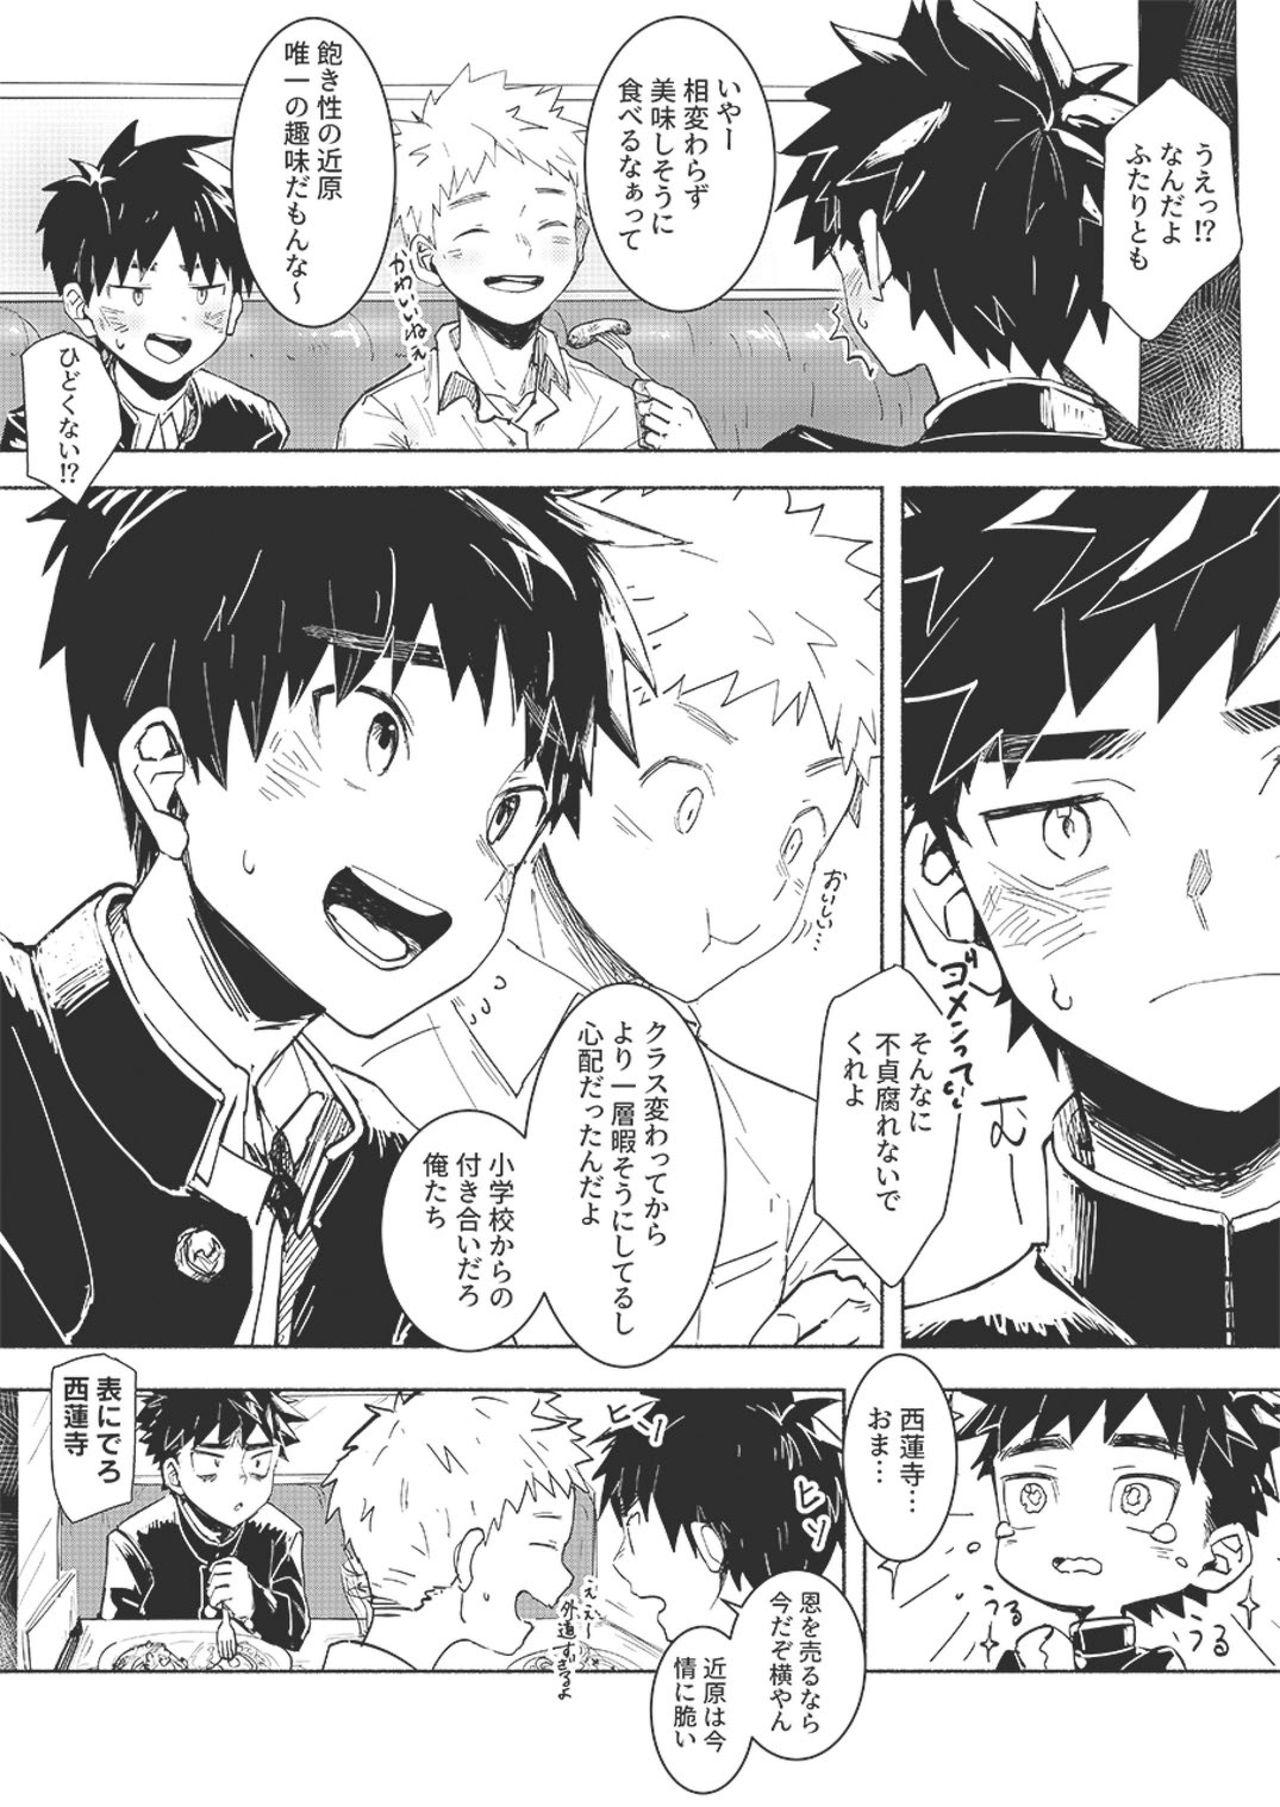 Atm 【bttn】【fall in ecstasy】 - Original Handsome - Page 10